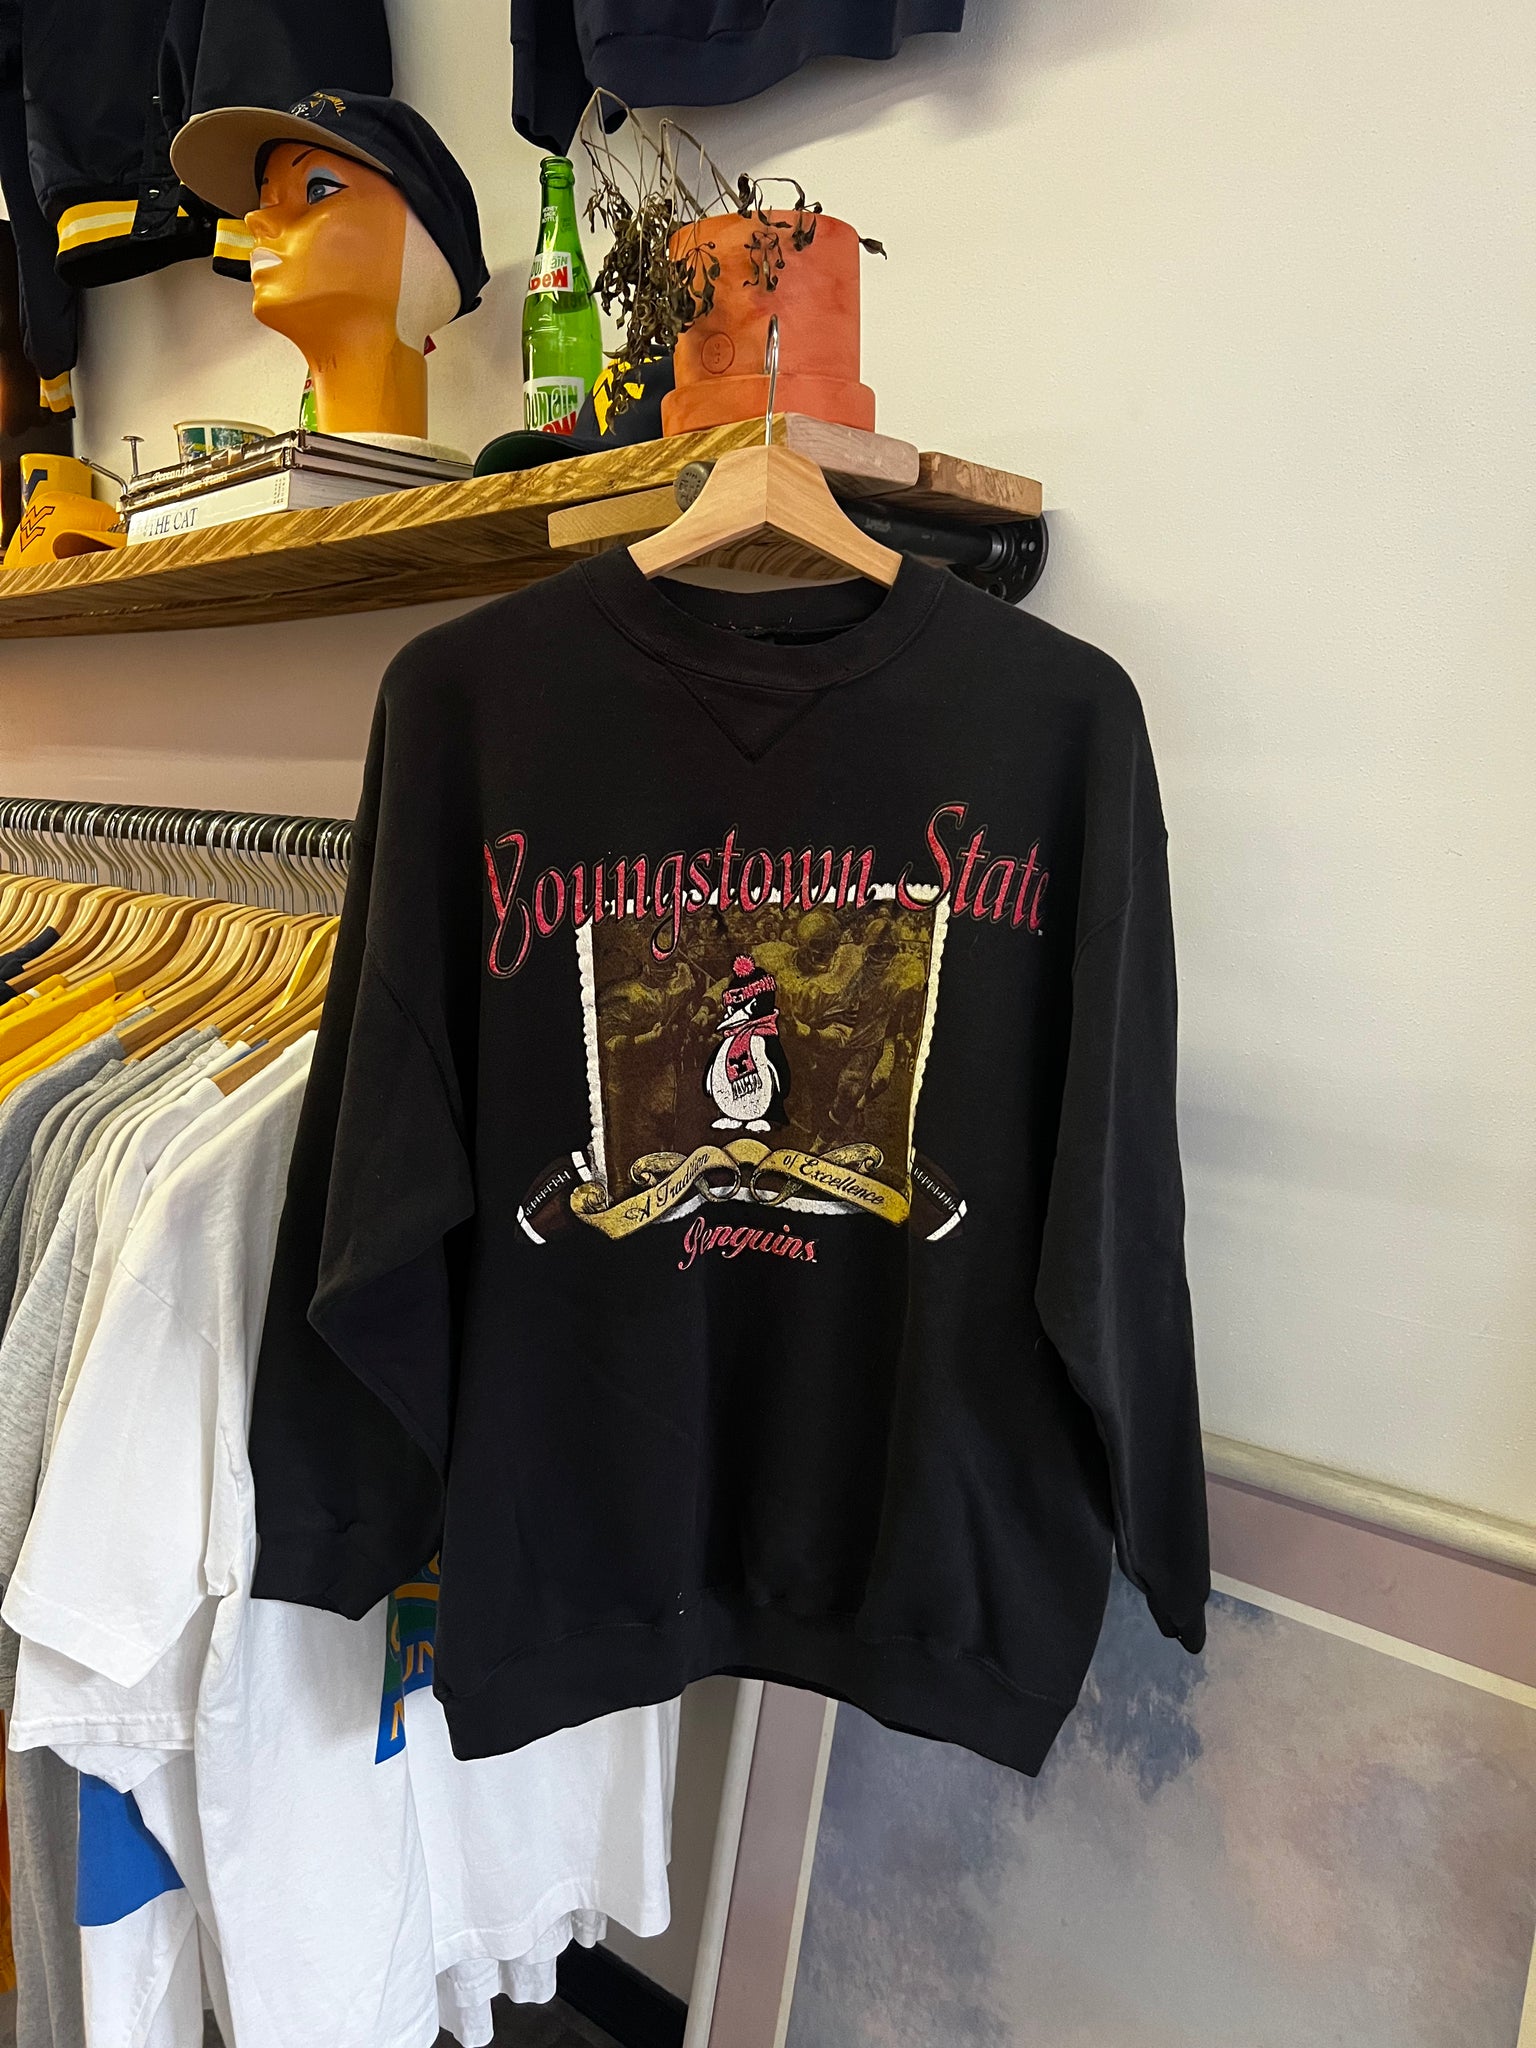 Vintage 90s Youngstown State Graphic Crewneck